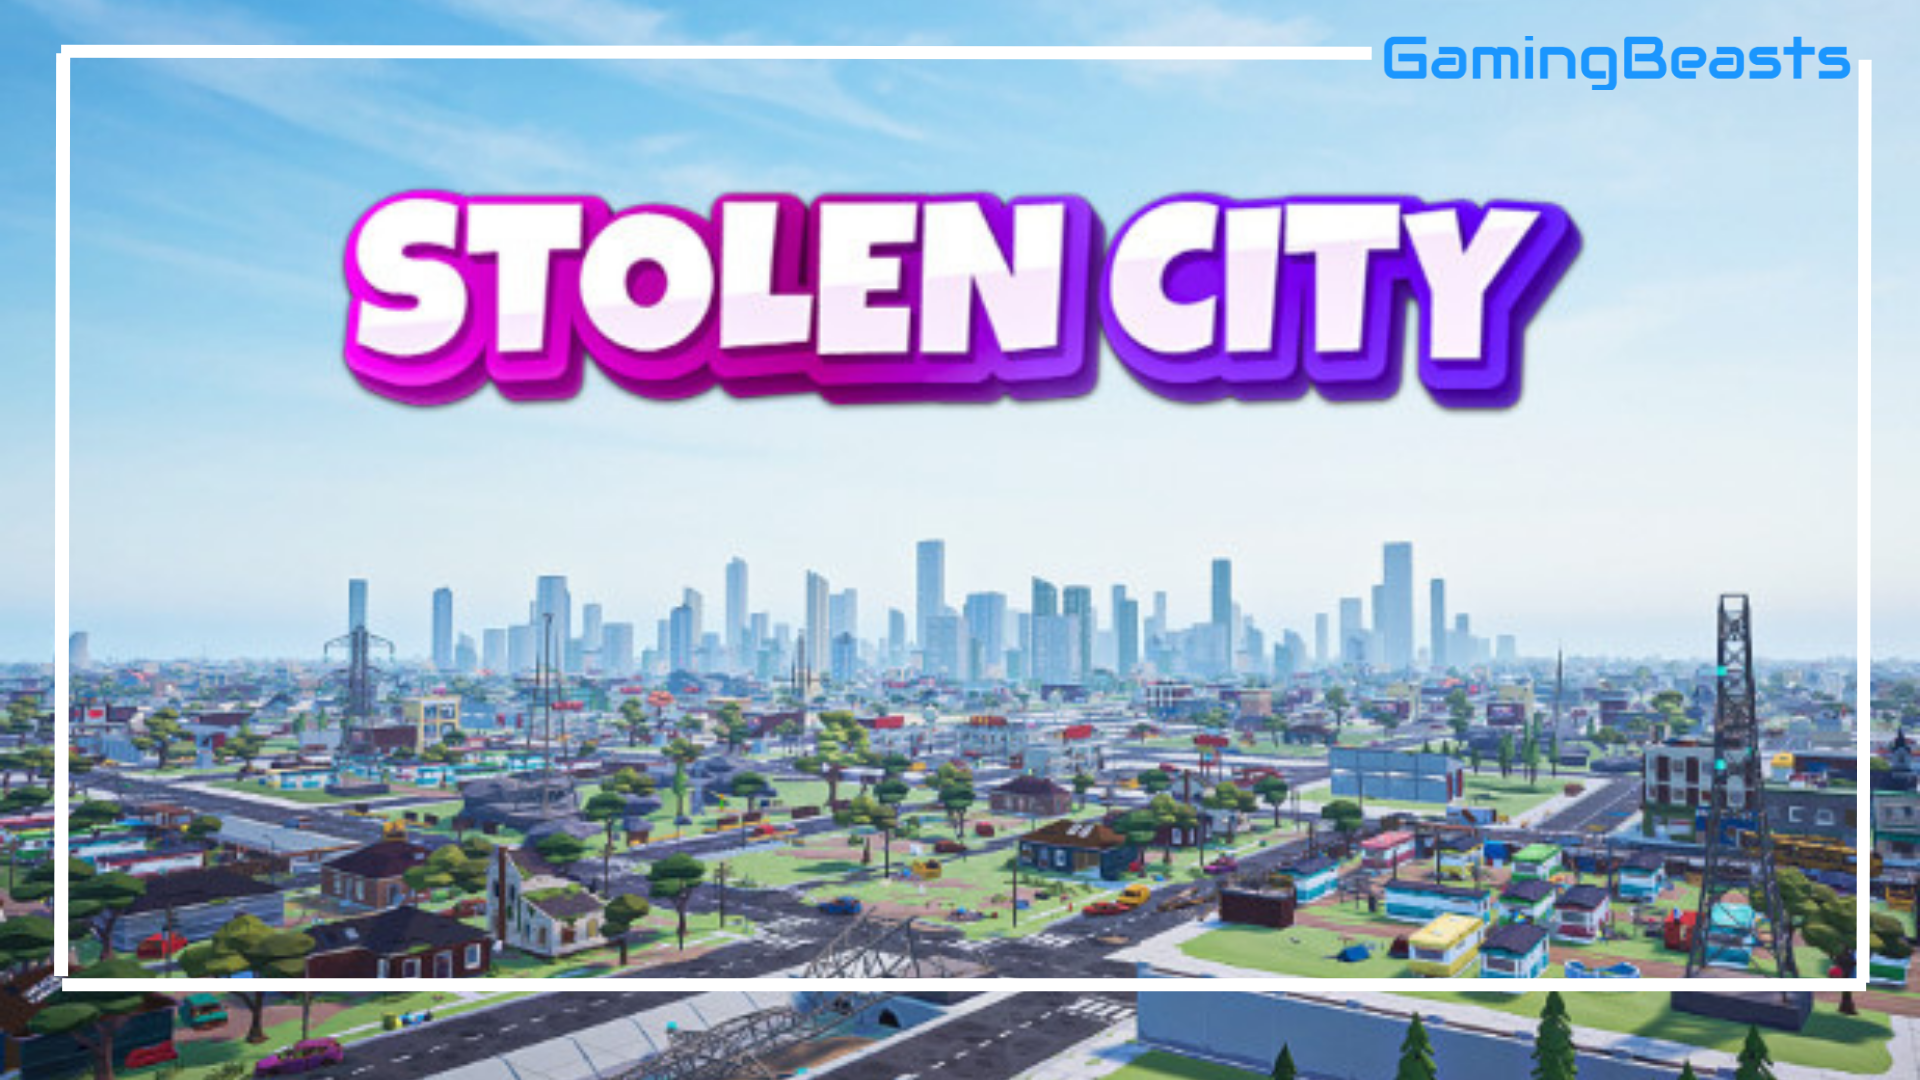 Stolen City PC Free Game Download Full Version - Gaming Beasts